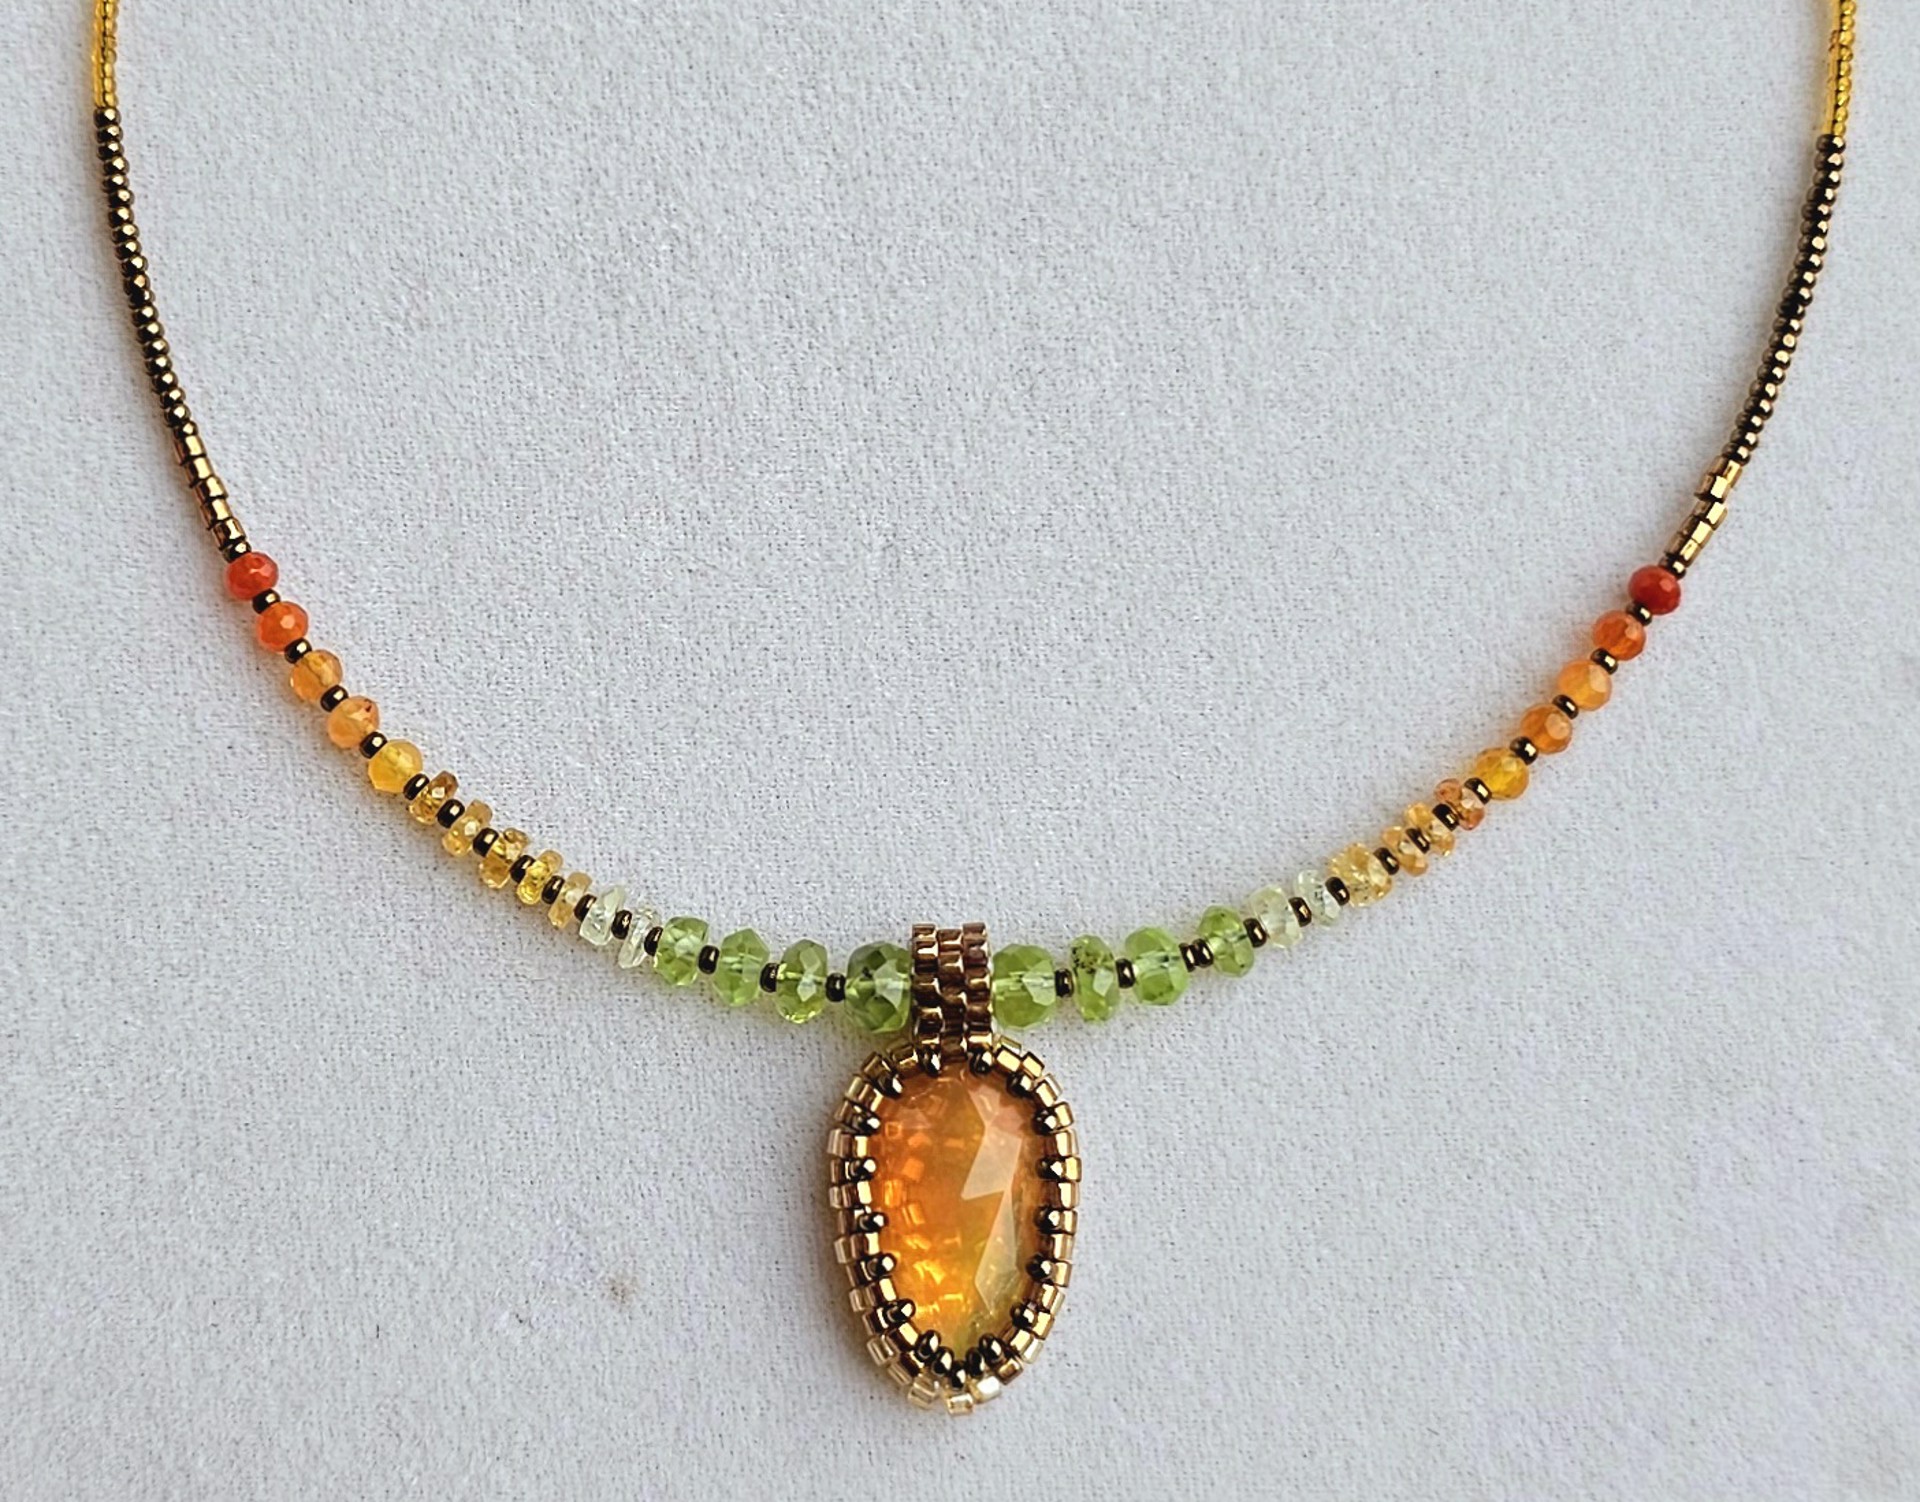 Faceted Ethiopian Opal Pendant with Gemstone Beads by Nina Vidal